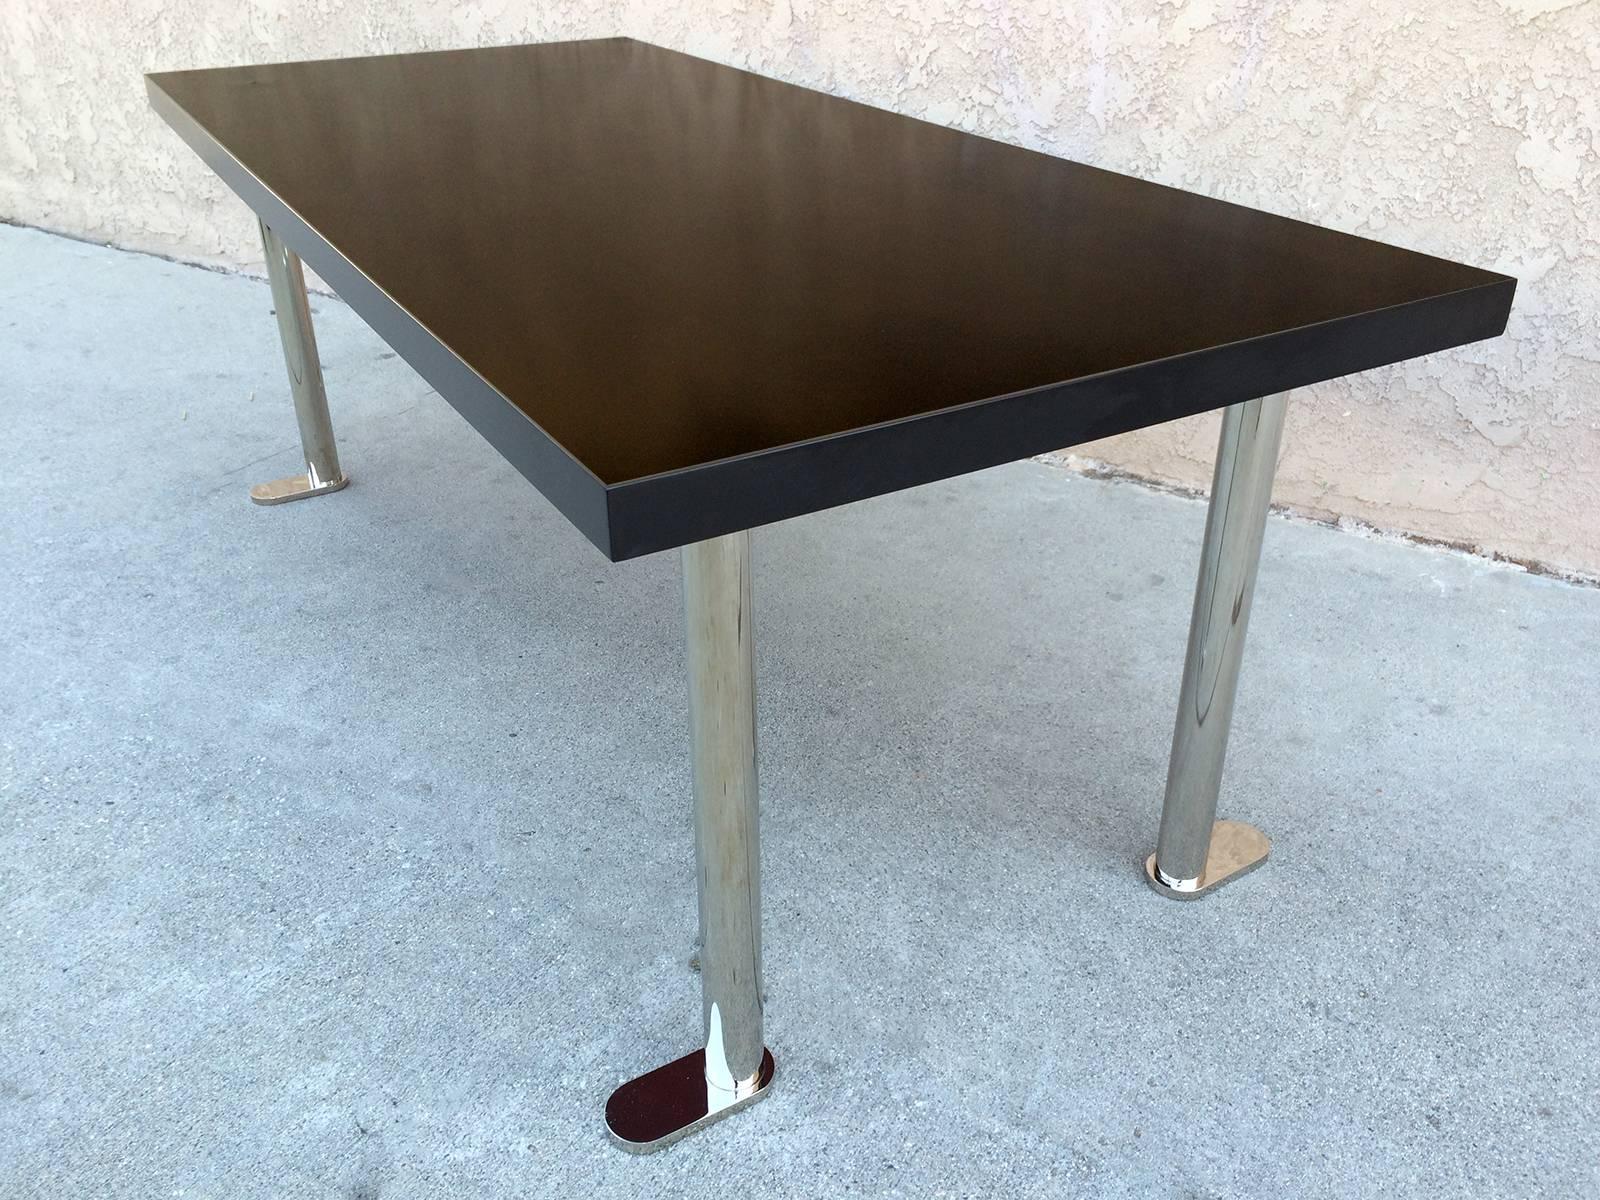 This striking black lacquered table sits upon four polished chrome legs. The tables splayed, flat feet give it a playful almost cartoonish feel. This piece may be used as a dining table and or a desk.